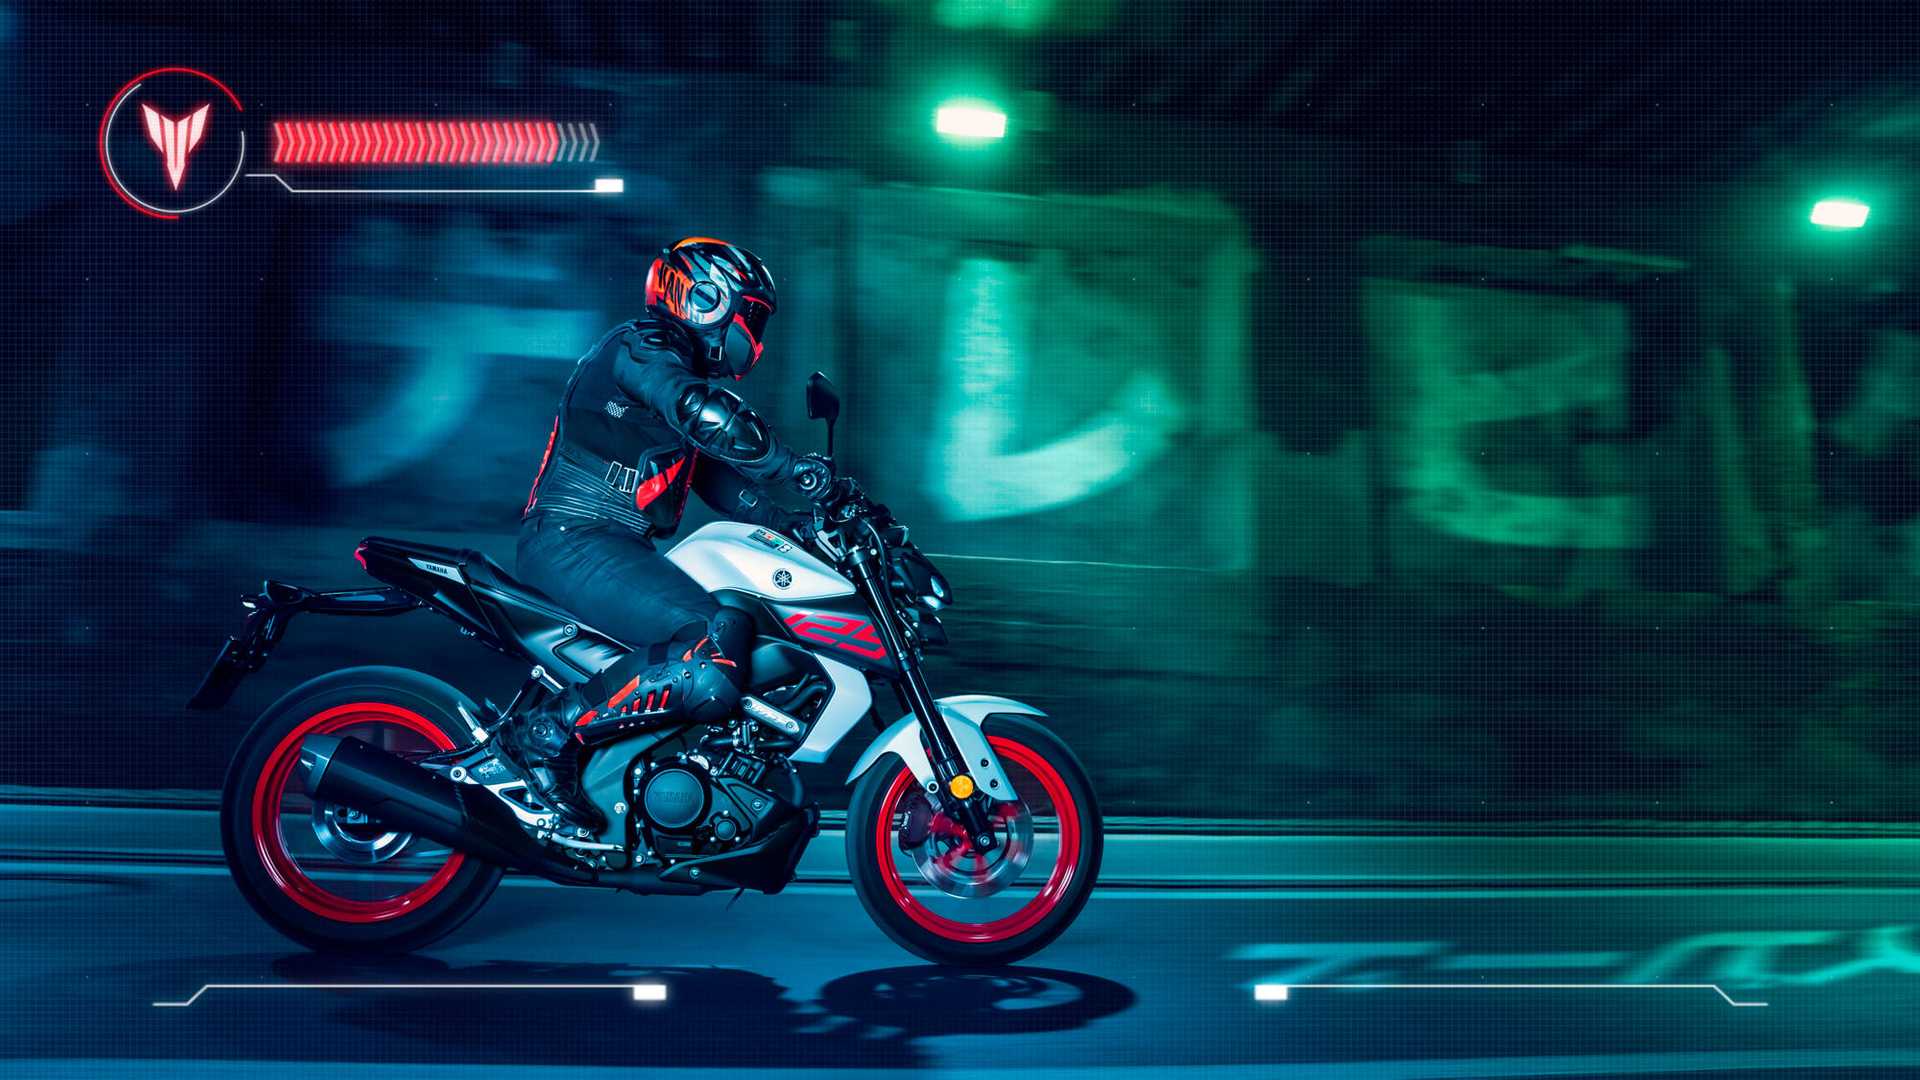 New 2020 Yamaha MT 125 Launched With Variable Valve Timing